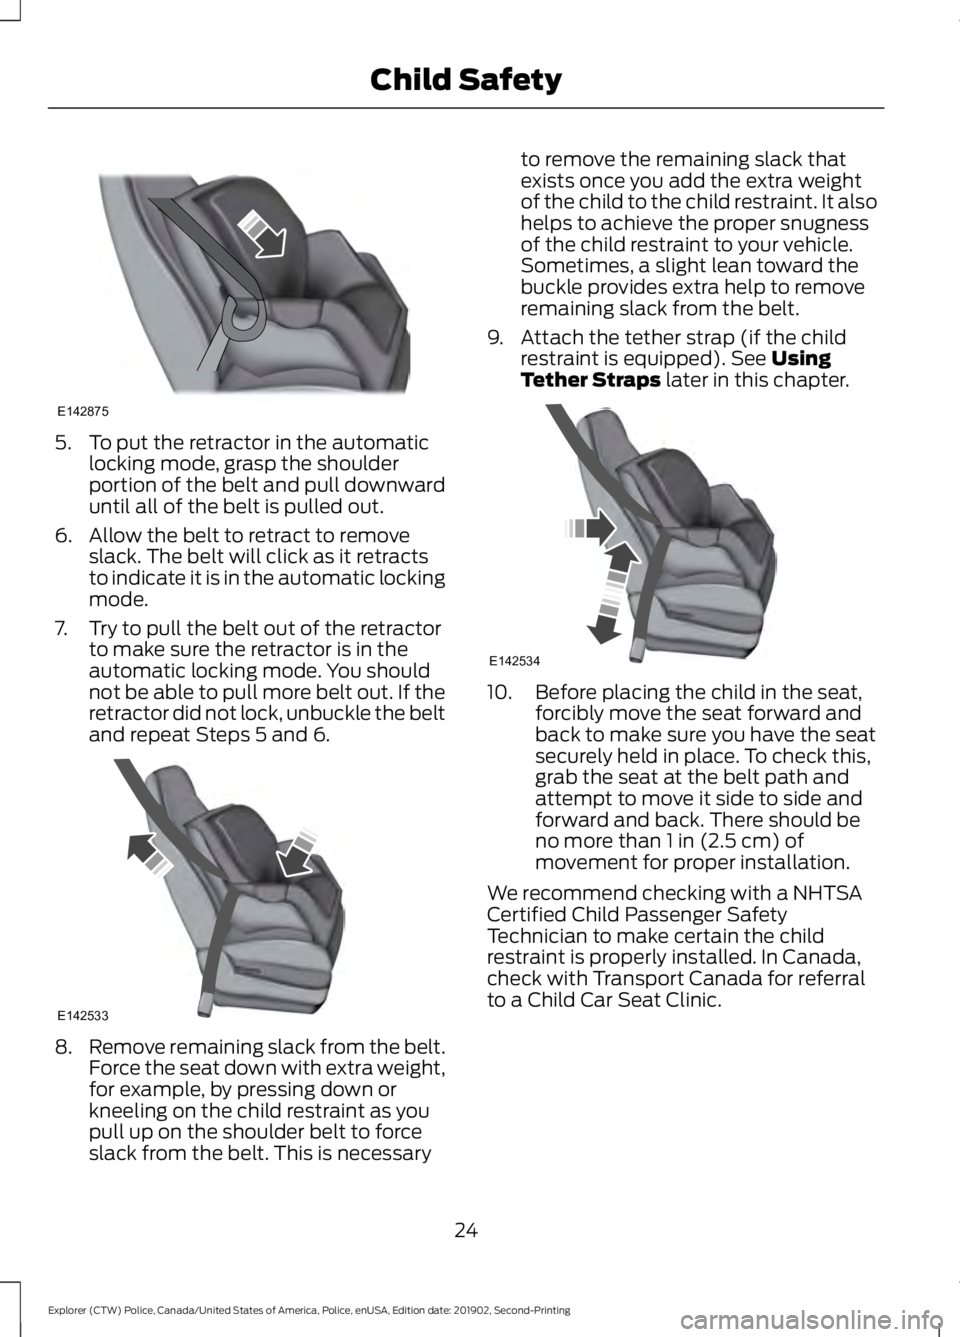 FORD POLICE INTERCEPTOR 2020  Owners Manual 5. To put the retractor in the automatic
locking mode, grasp the shoulder
portion of the belt and pull downward
until all of the belt is pulled out.
6. Allow the belt to retract to remove slack. The b